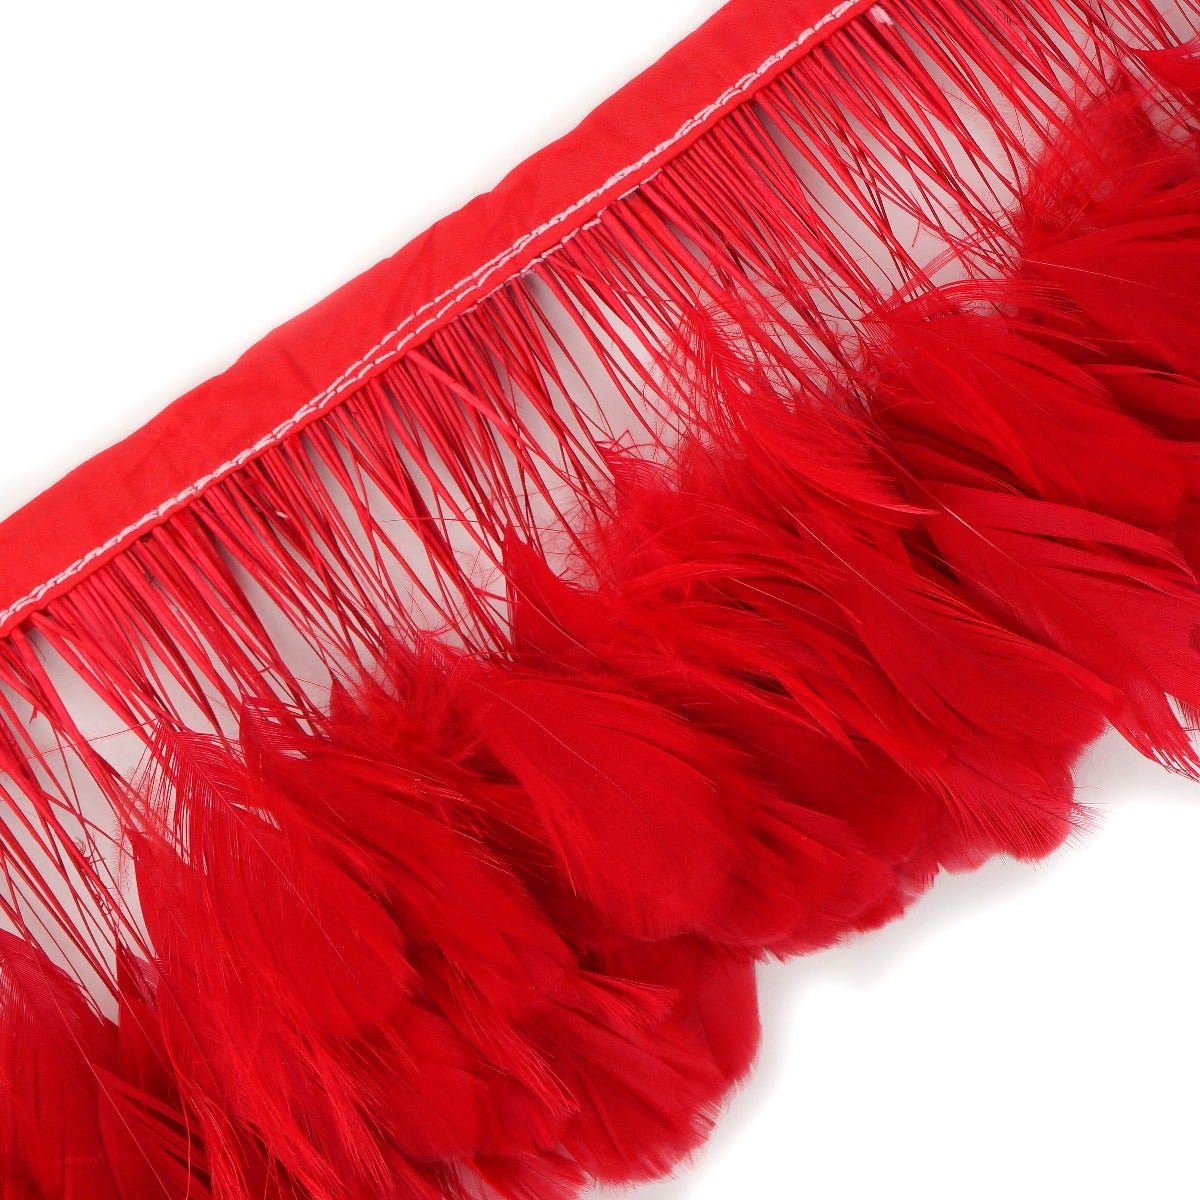 Stripped White-Dyed Coque Fringe - Red